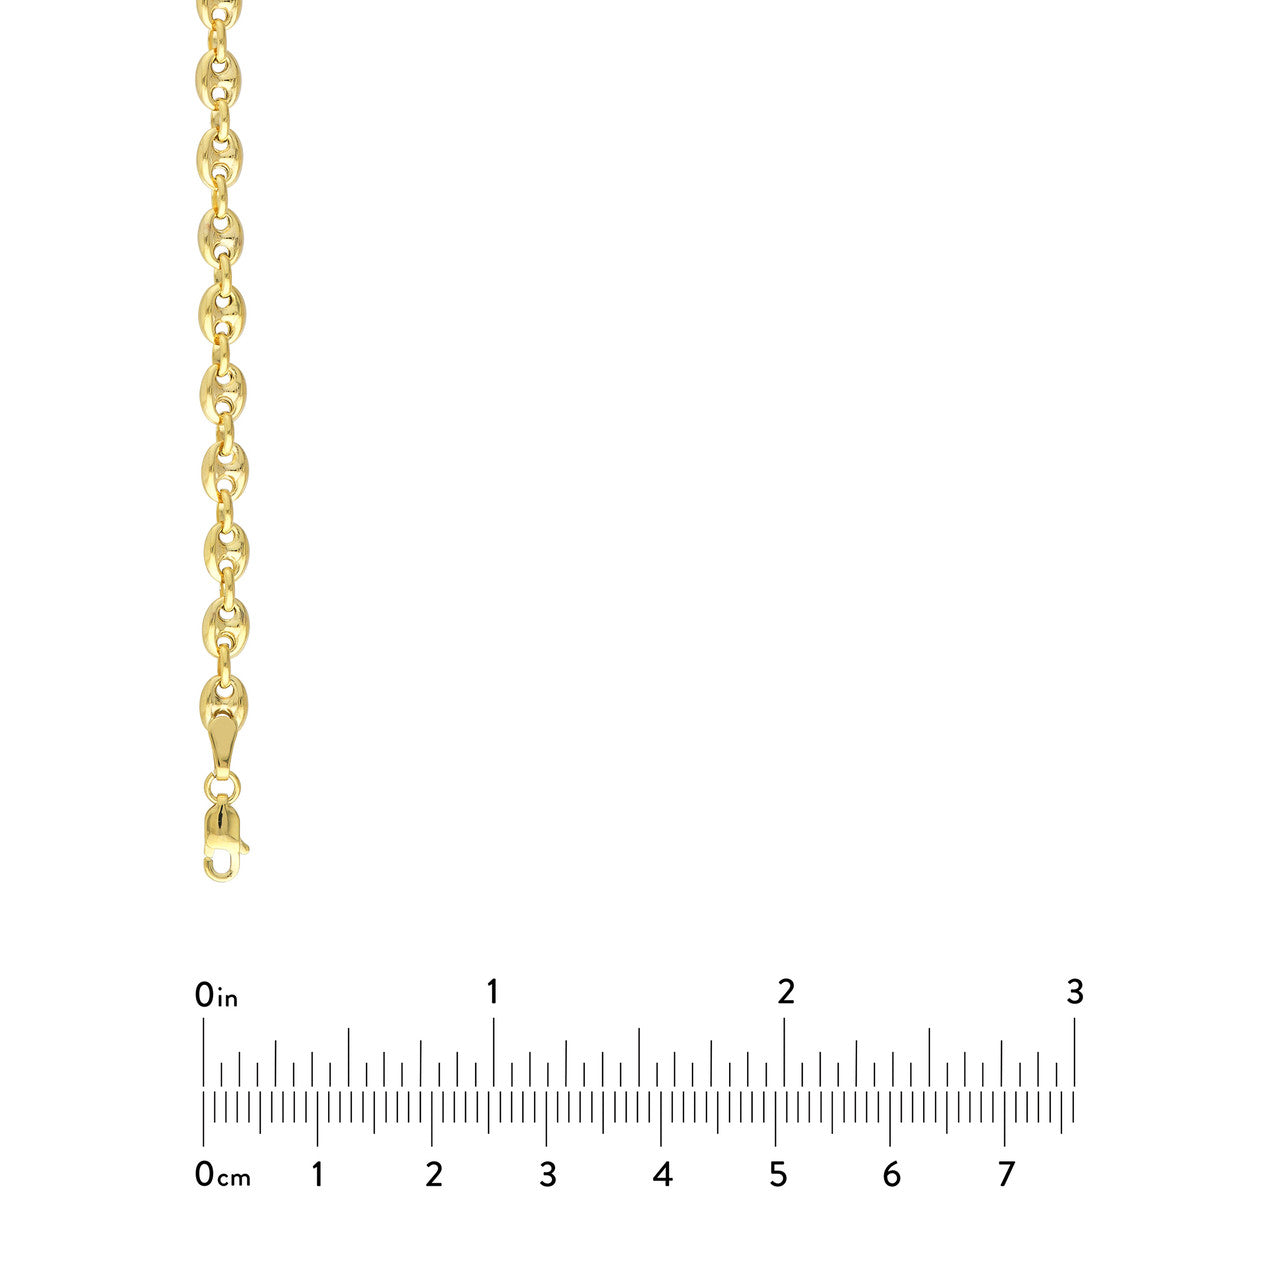 14K Yellow Gold 4.5mm Puff Mariner Bracelet Anklet Choker Necklace Pendant Chain